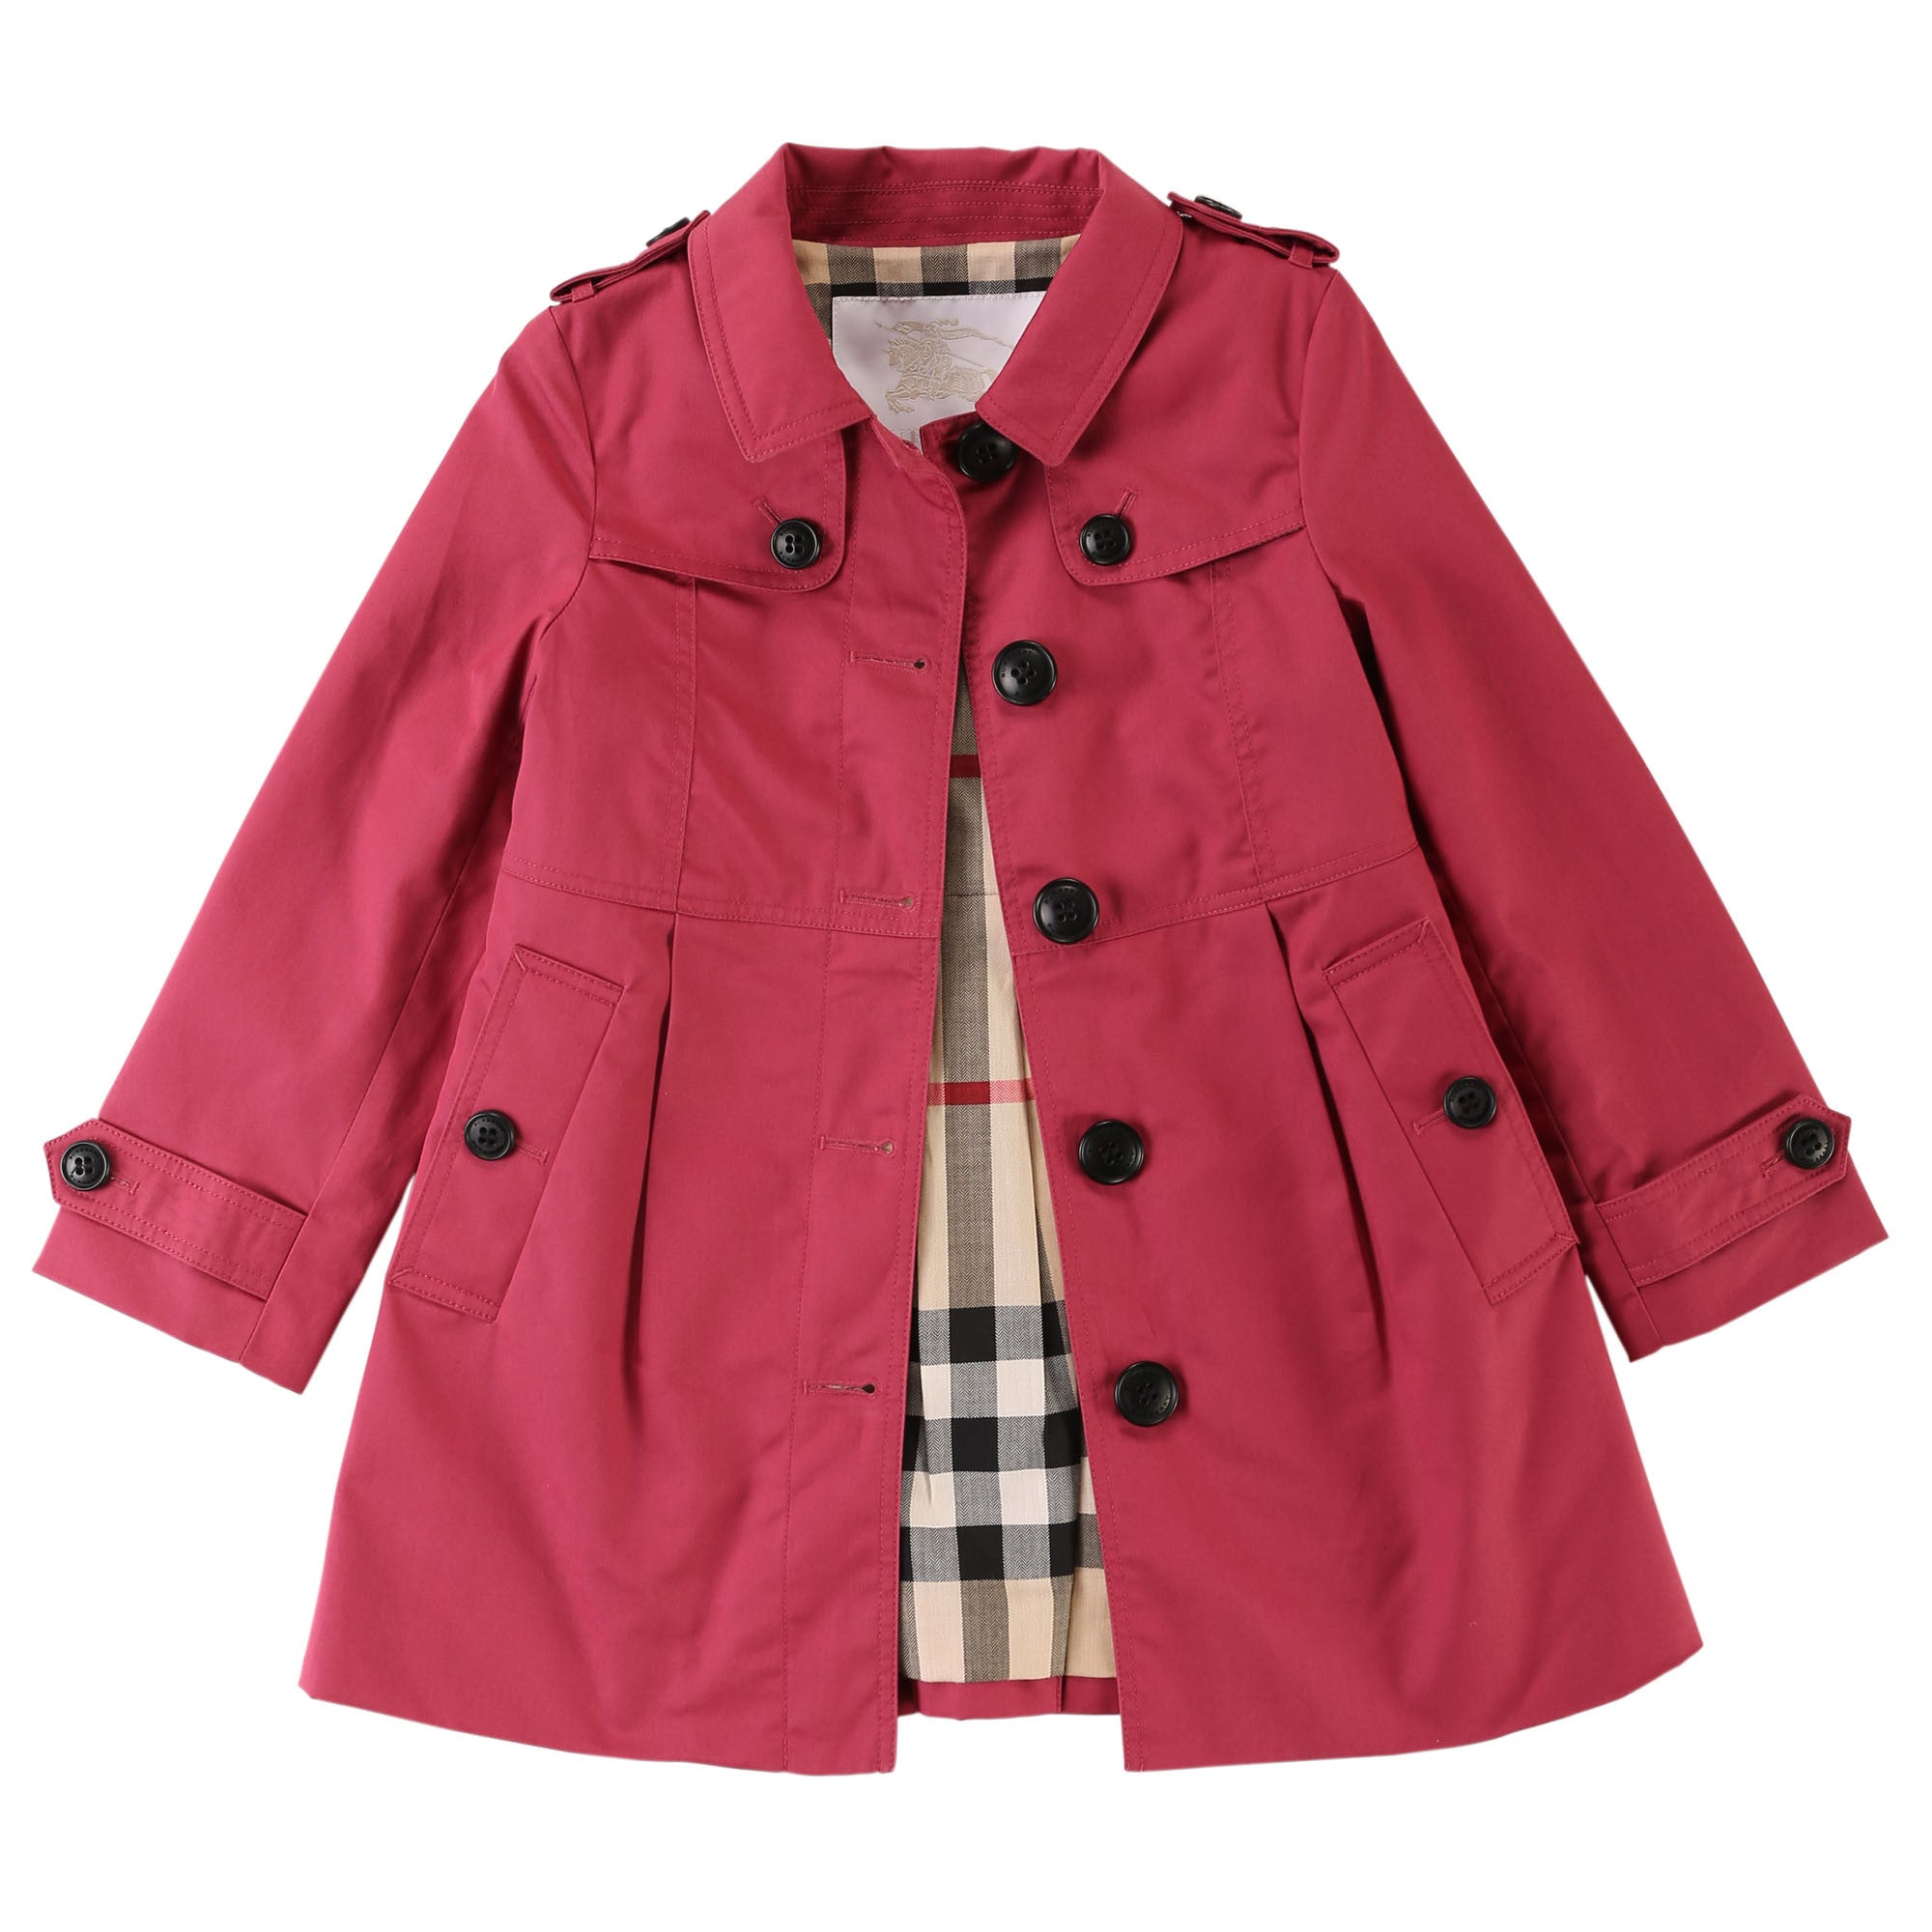 Baby Girls Pink Classic Trench Cotton Coat - CÉMAROSE | Children's Fashion Store - 1